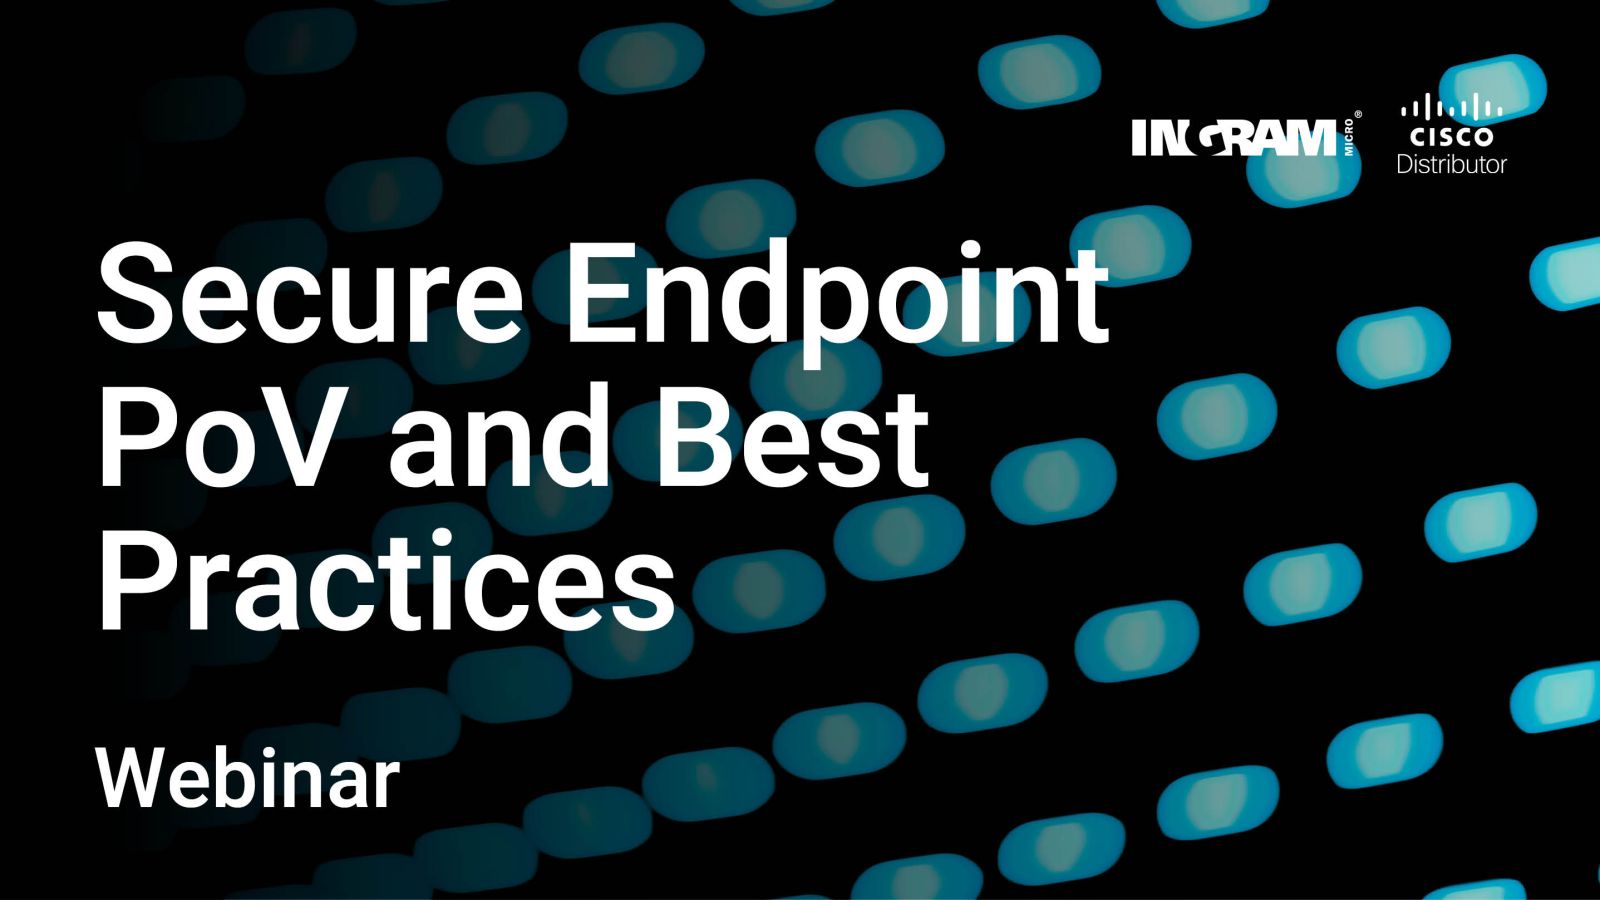 Secure Endpoint PoV and Best Practices Featured Image